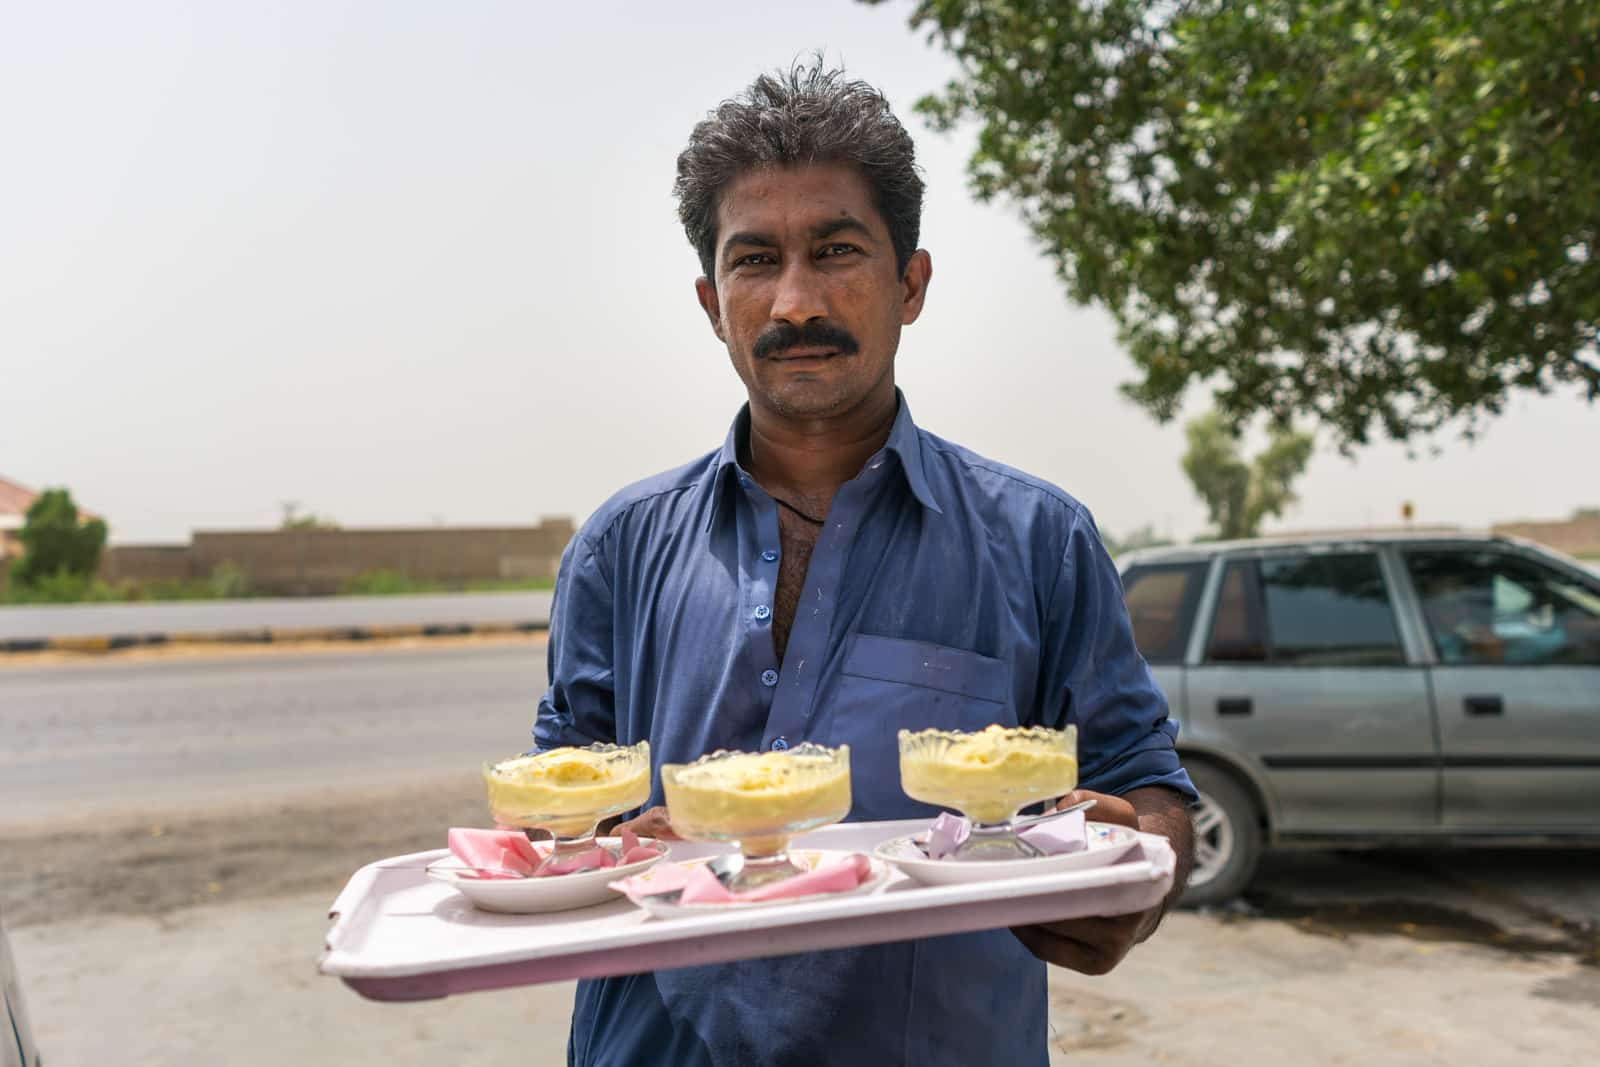 Sindh travel guide - Man serving ice cream in Matiari town - Lost With Purpose travel blog